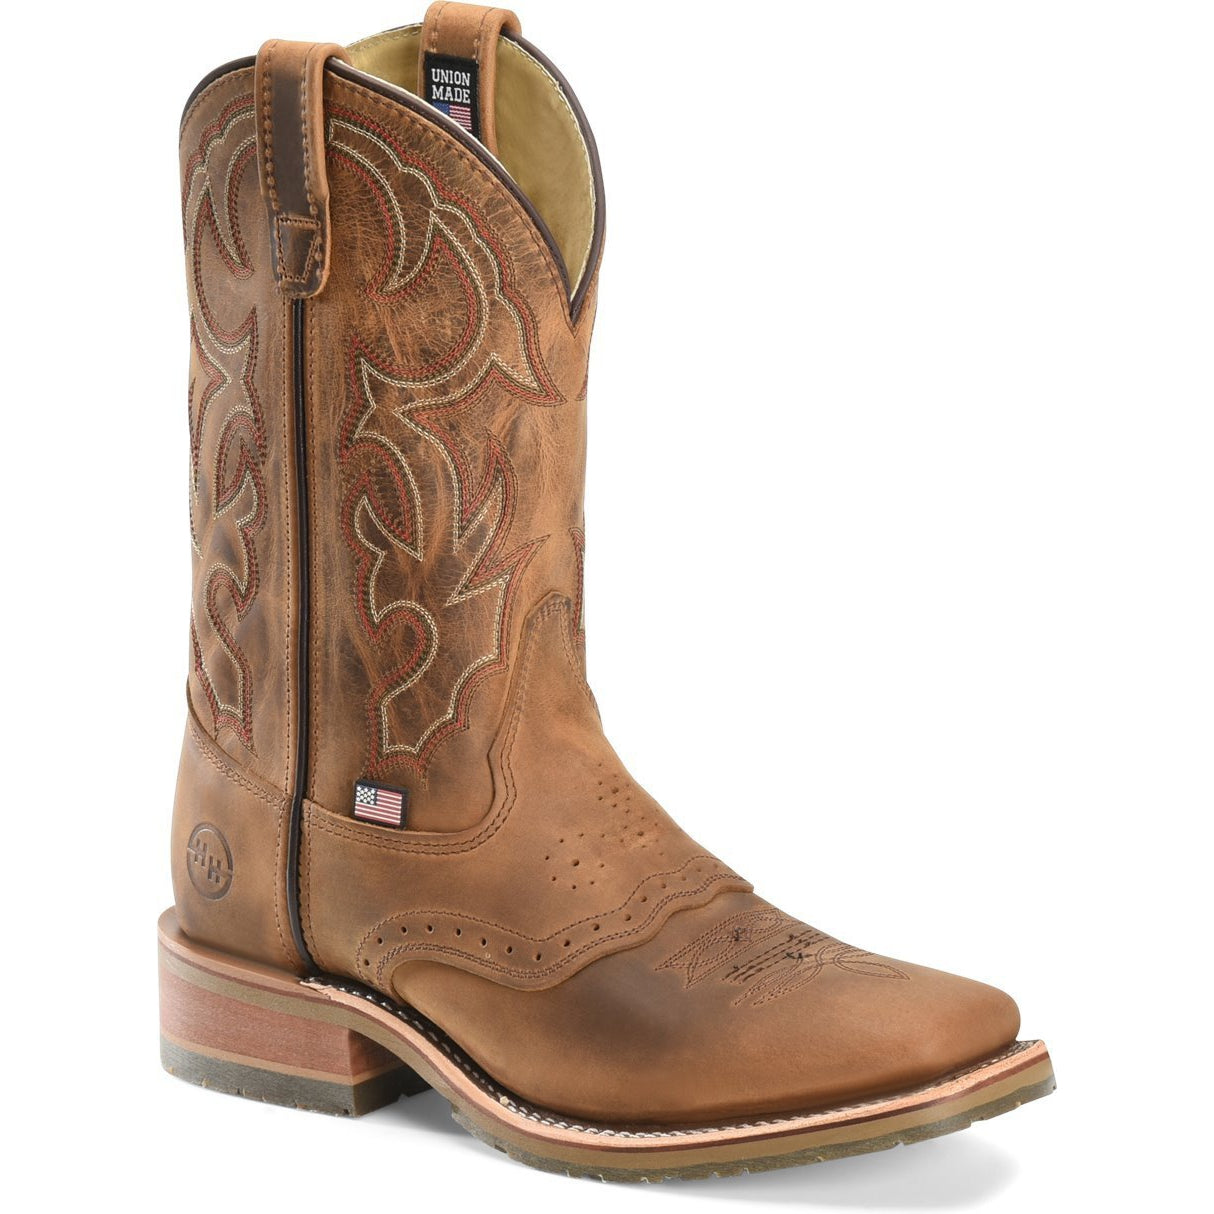 Double H Men's Jase 11" Square Toe USA Made Western Work Boot - DH3560 7 / Medium / Light Brown - Overlook Boots